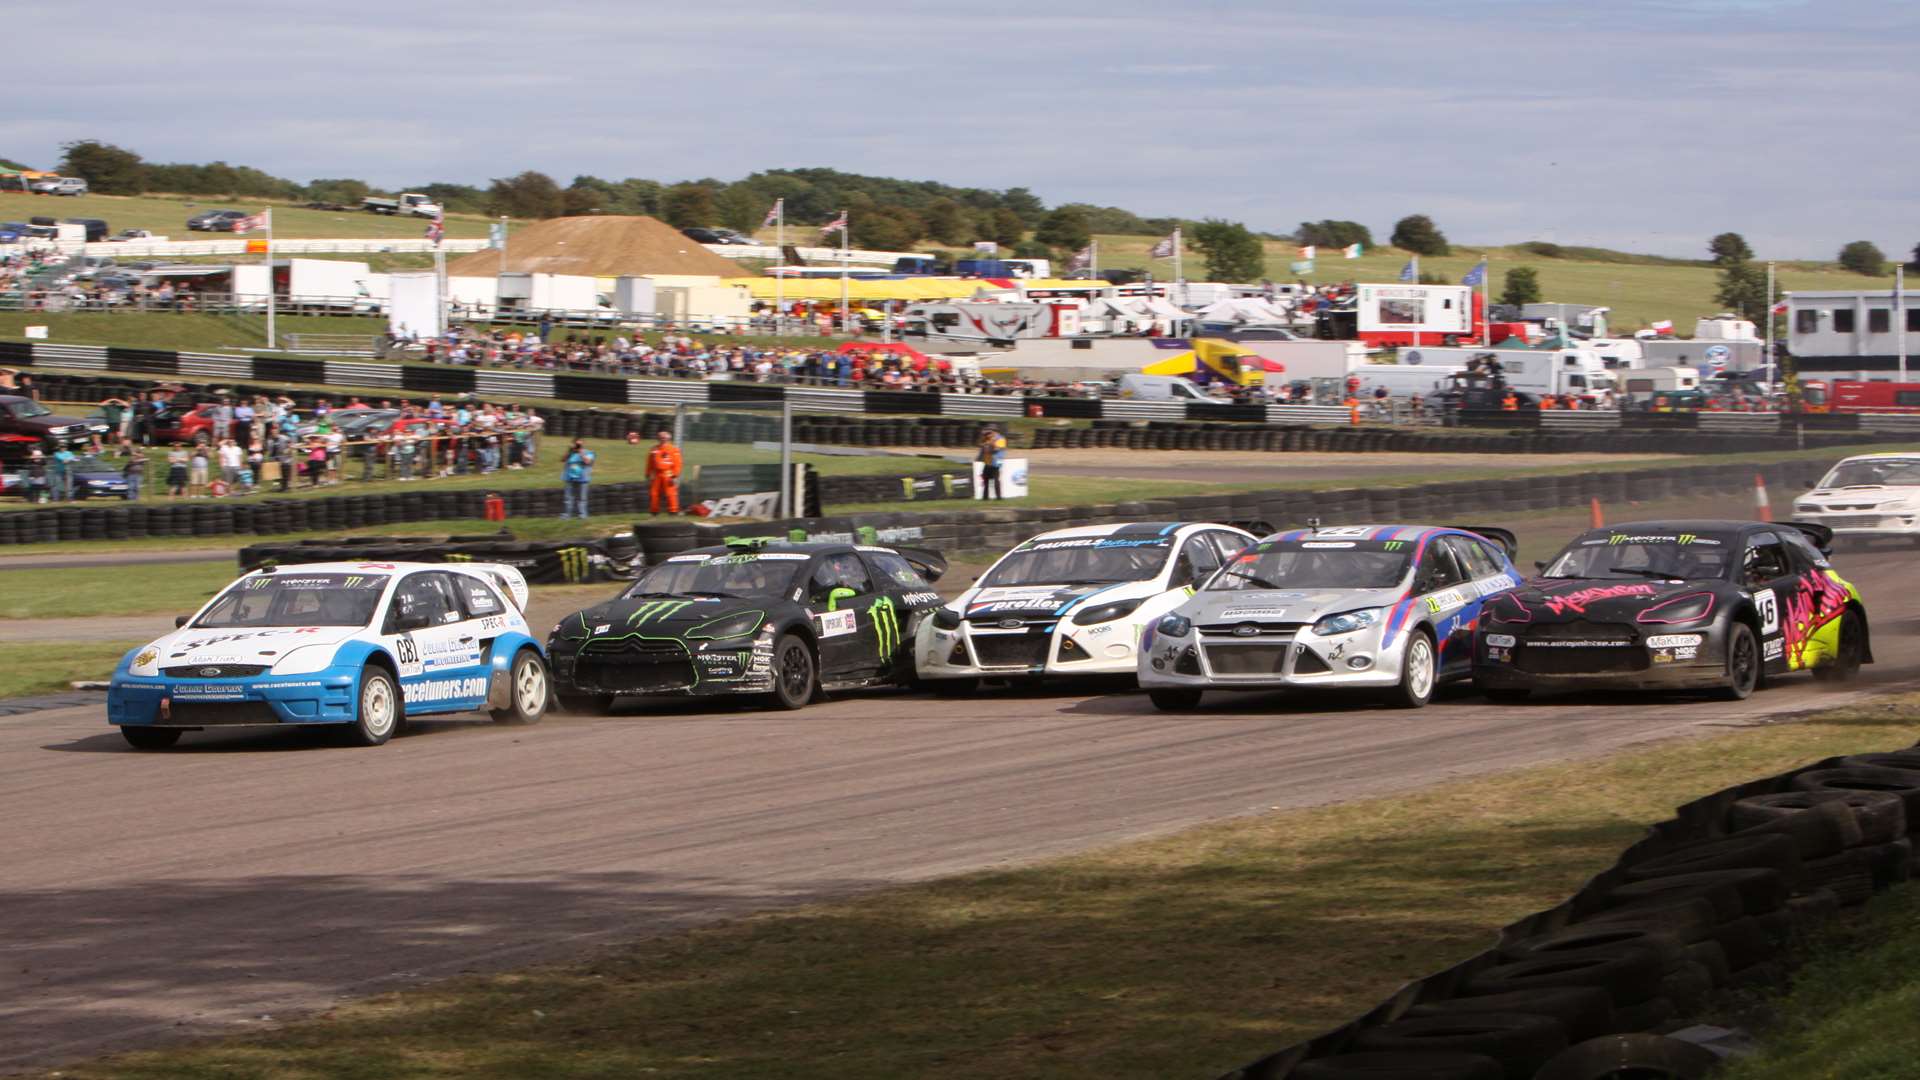 Bumper to bumper action at Lydden Hill